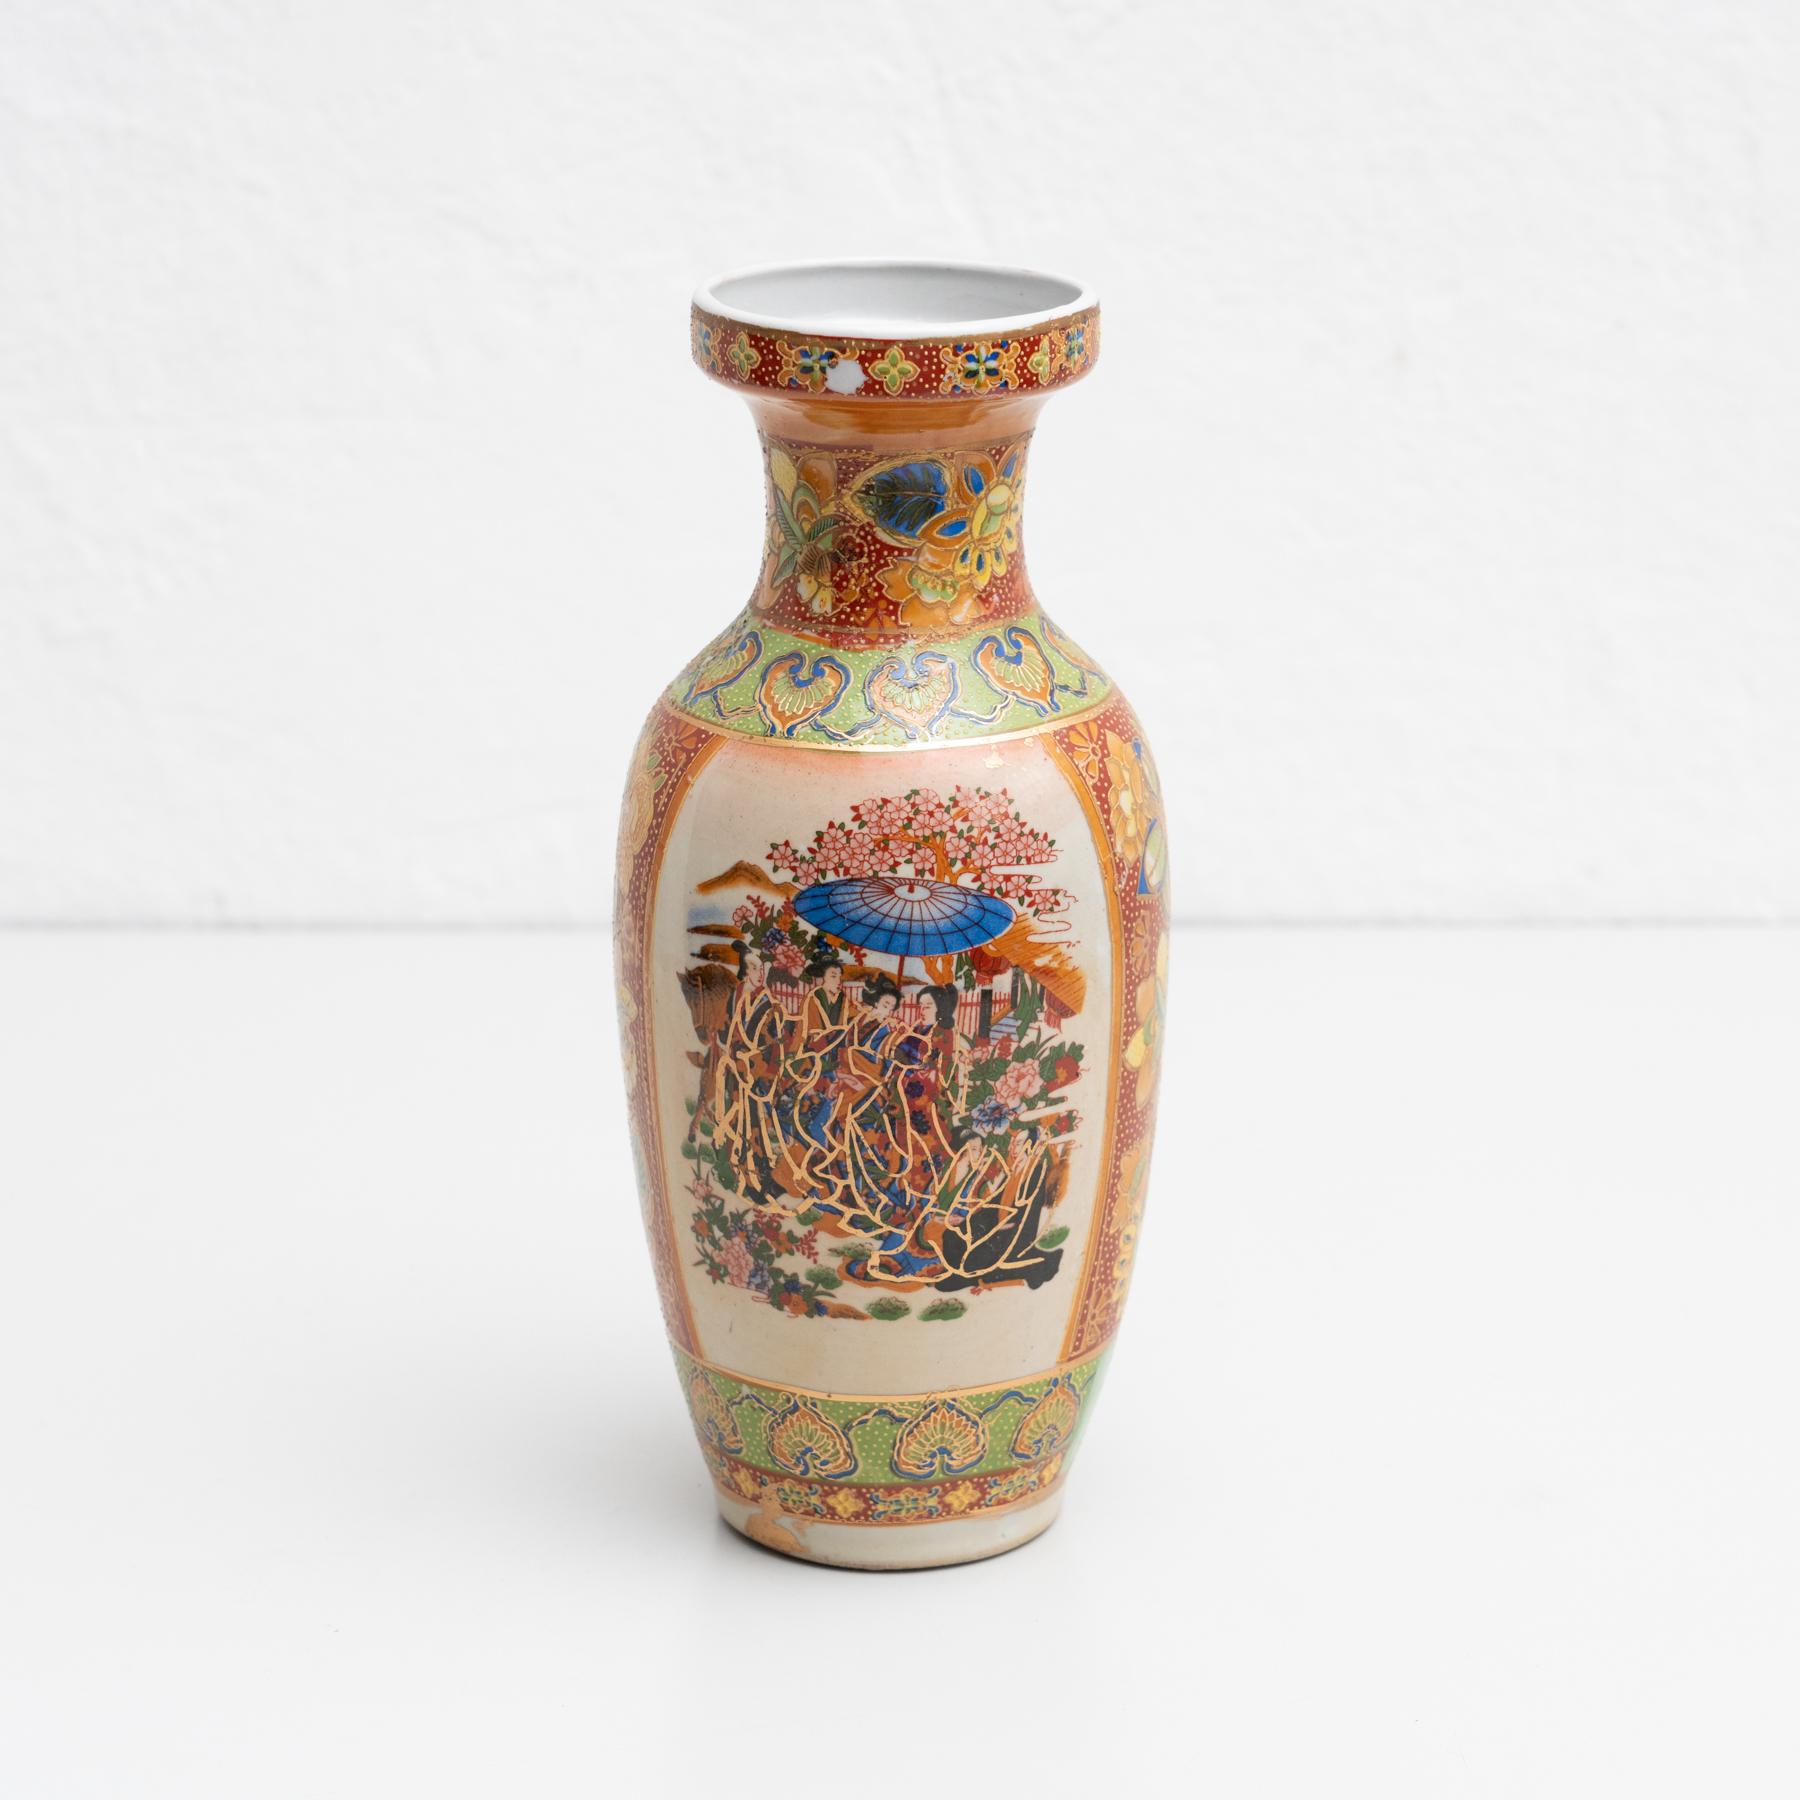 Asian ceramic hand-painted vase. Decorated with a traditional scene in the front.

Made by unknown manufacturer from Asia, circa 1950.

In original condition, with minor wear consistent with age and use, preserving a beautiful